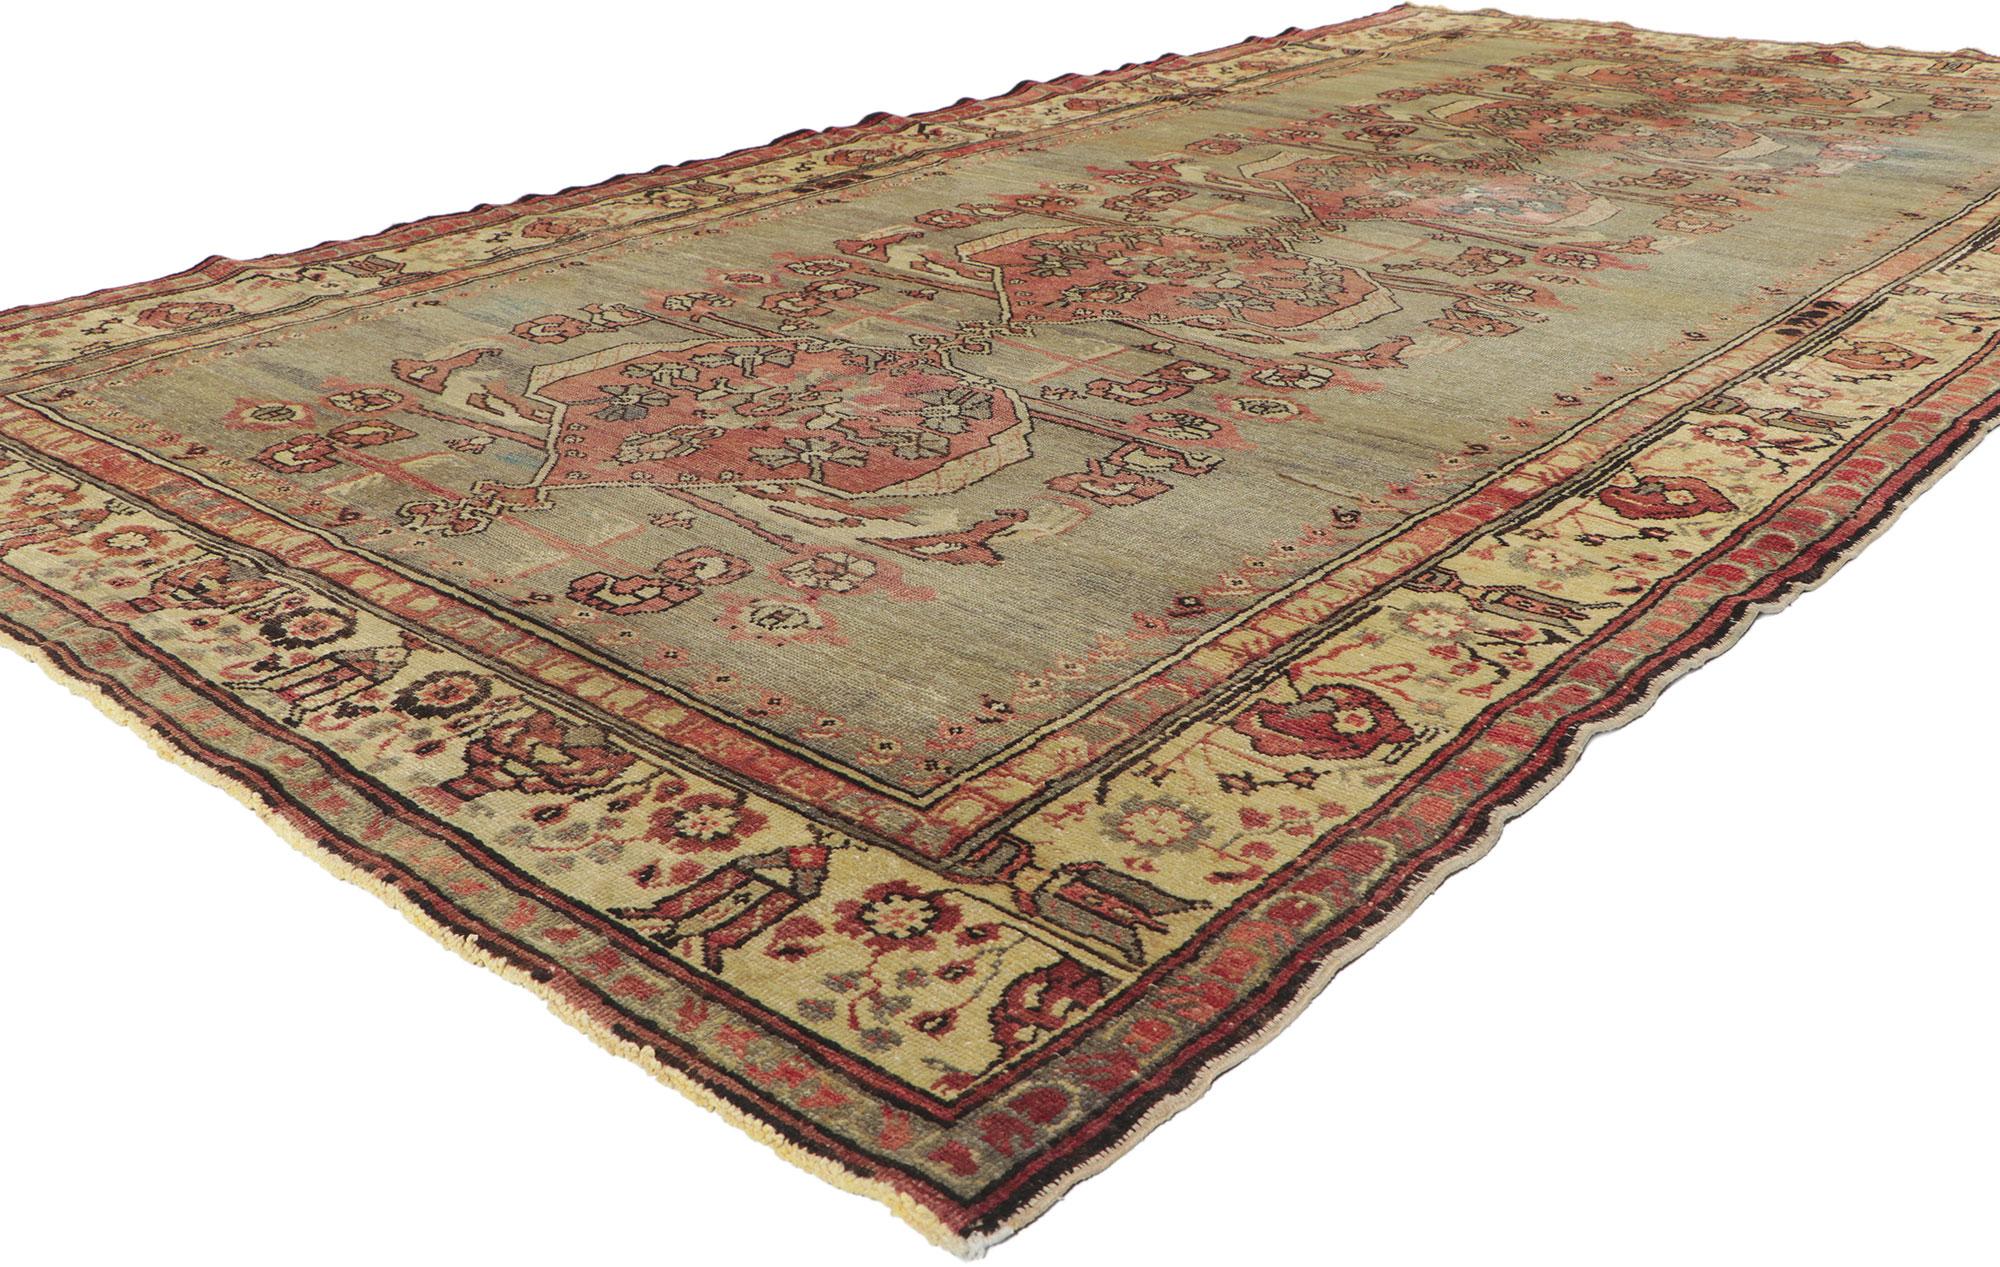 50216 Distressed Vintage Turkish Oushak Rug with Rustic Modern Industrial Style 05'10 X 10'10.  The architectural elements of naturalistic forms combined with Rustic Modern Industrial style, this hand knotted wool vintage Turkish Oushak rug astounds